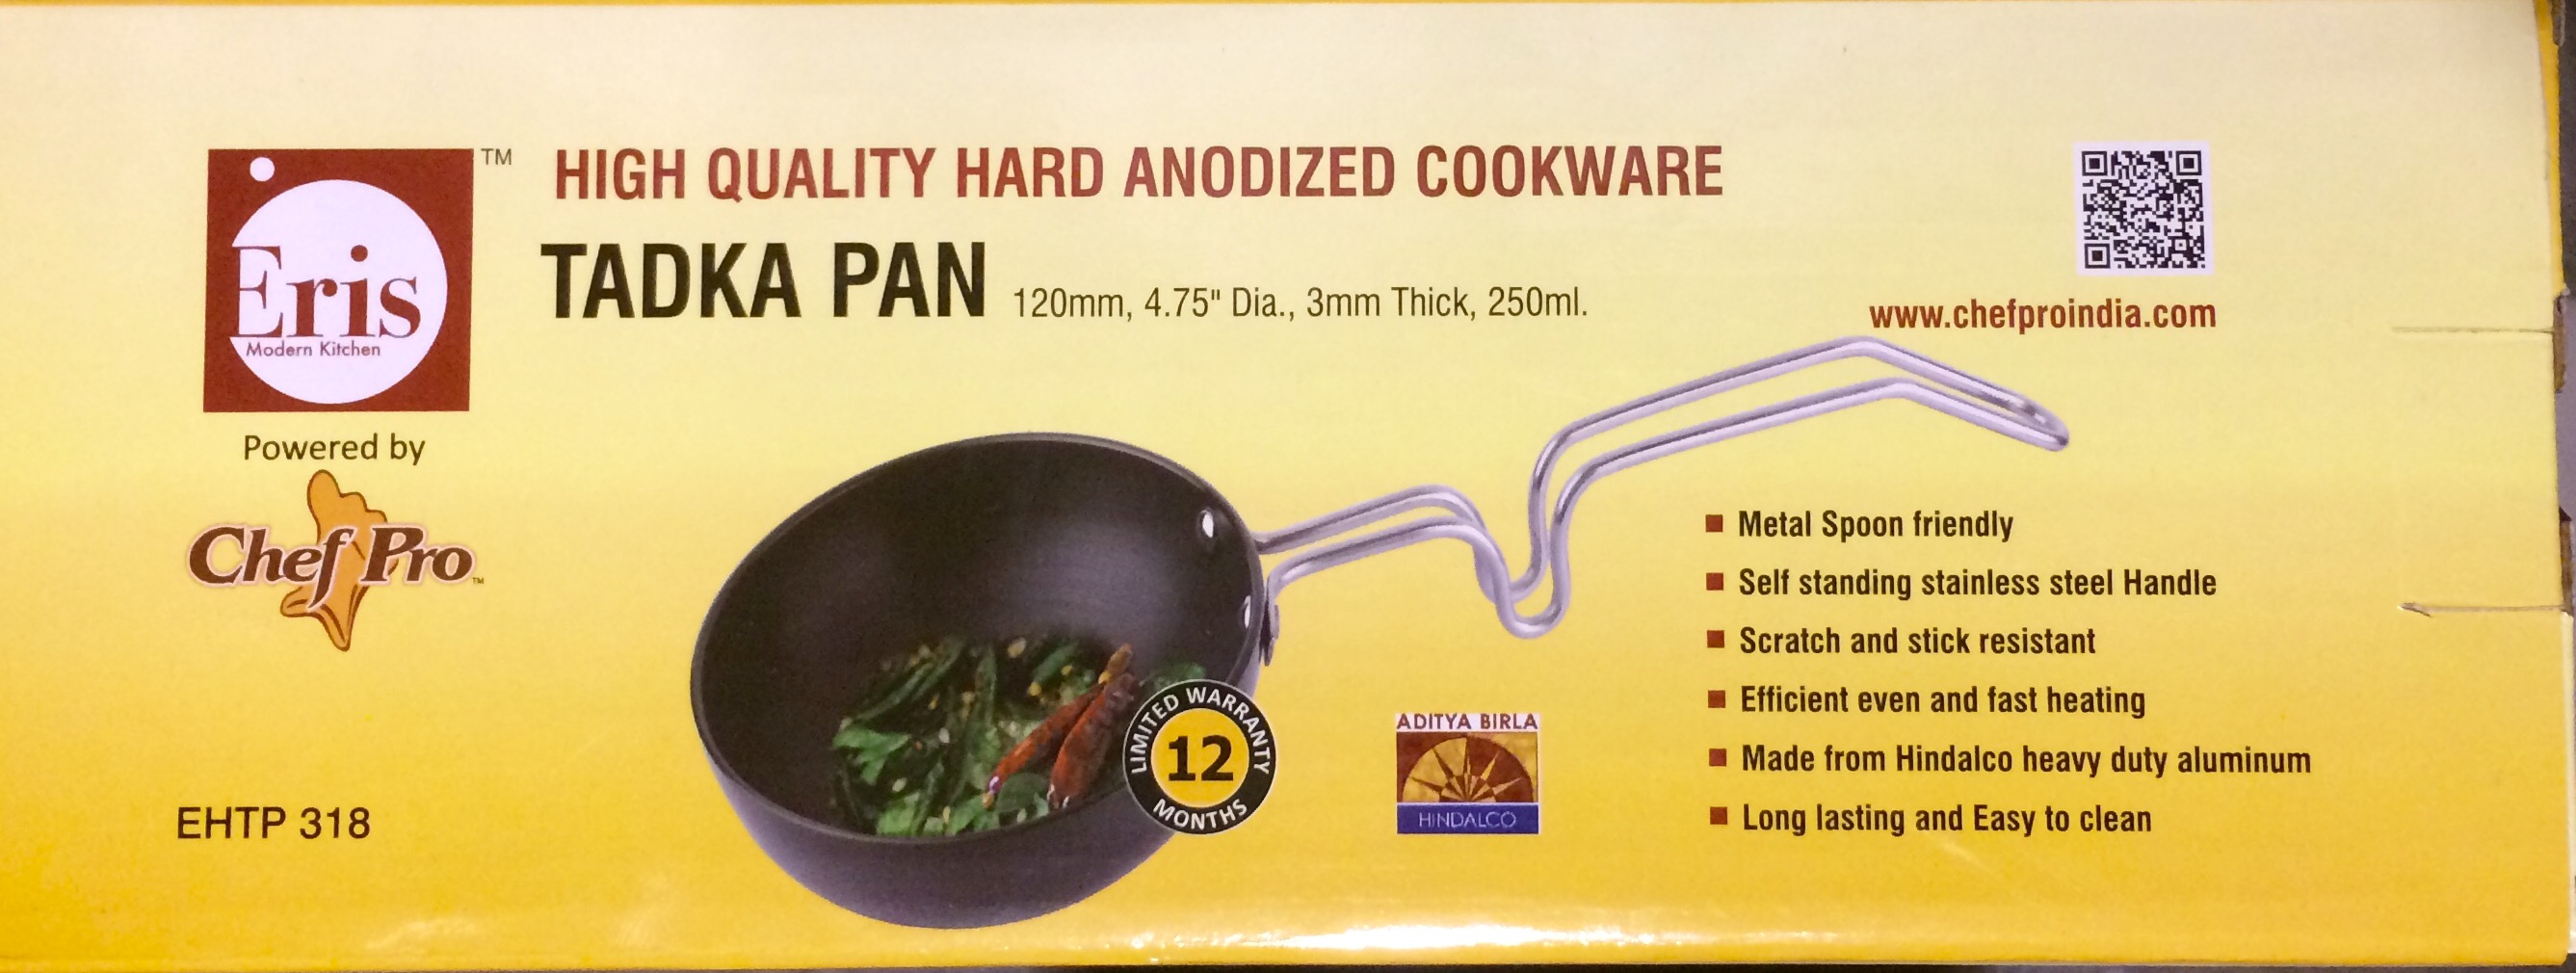 Eris 1 cup Tadka Spice heating Pan, Hard Anodized, with stand handle